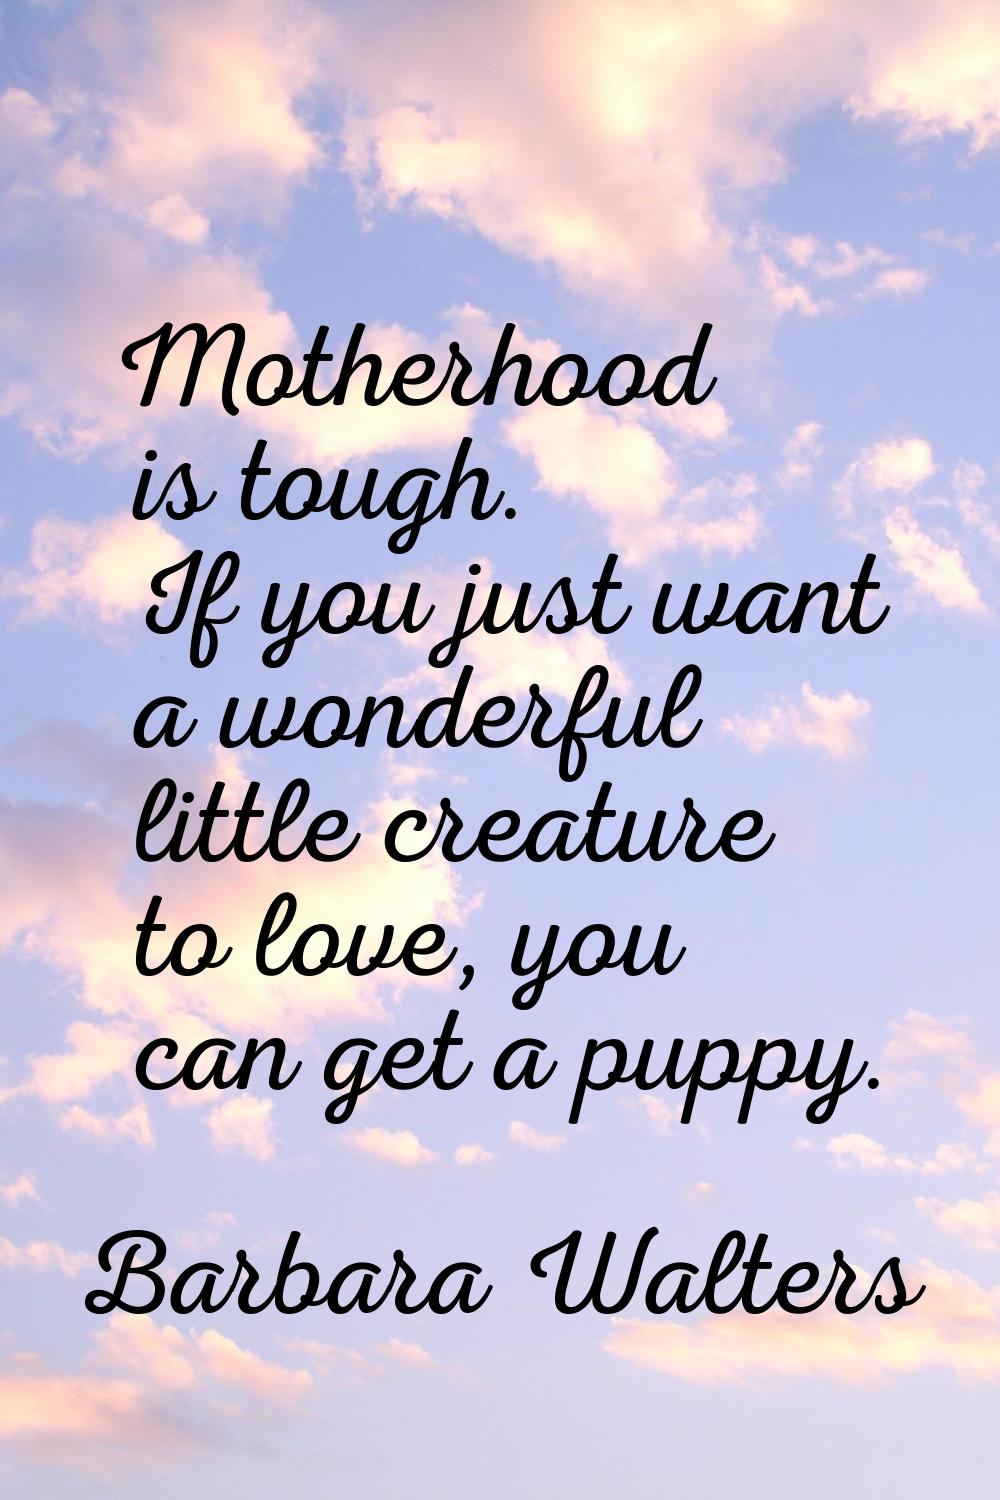 Motherhood is tough. If you just want a wonderful little creature to love, you can get a puppy.